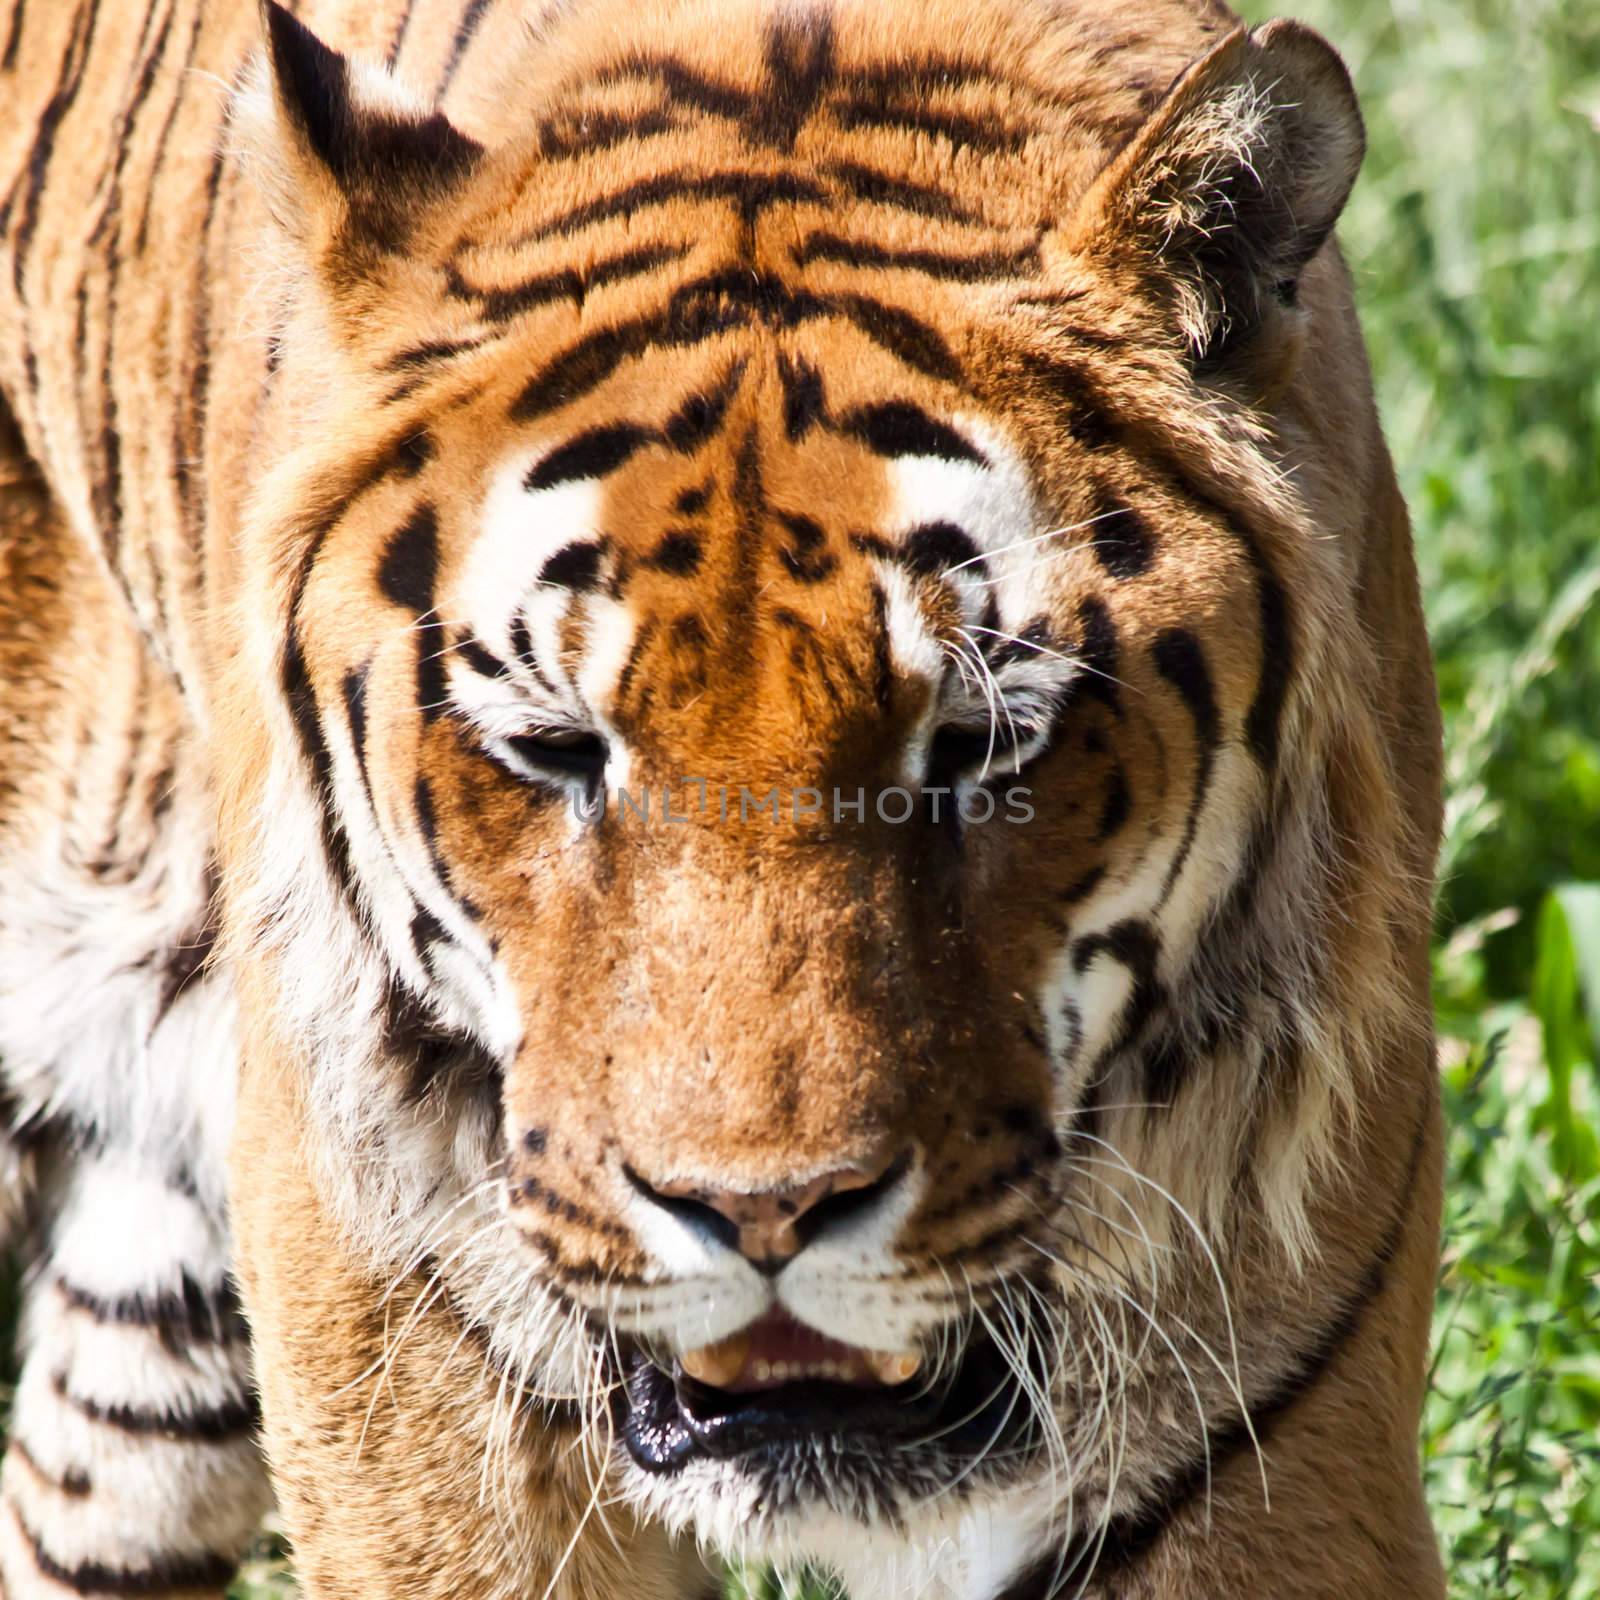 The tiger (Panthera tigris), a member of the Felidae family, is the largest of the four "big cats" in the genus Panthera. The tiger is native to much of eastern and southern Asia, and is an apex predator and an obligate carnivore.